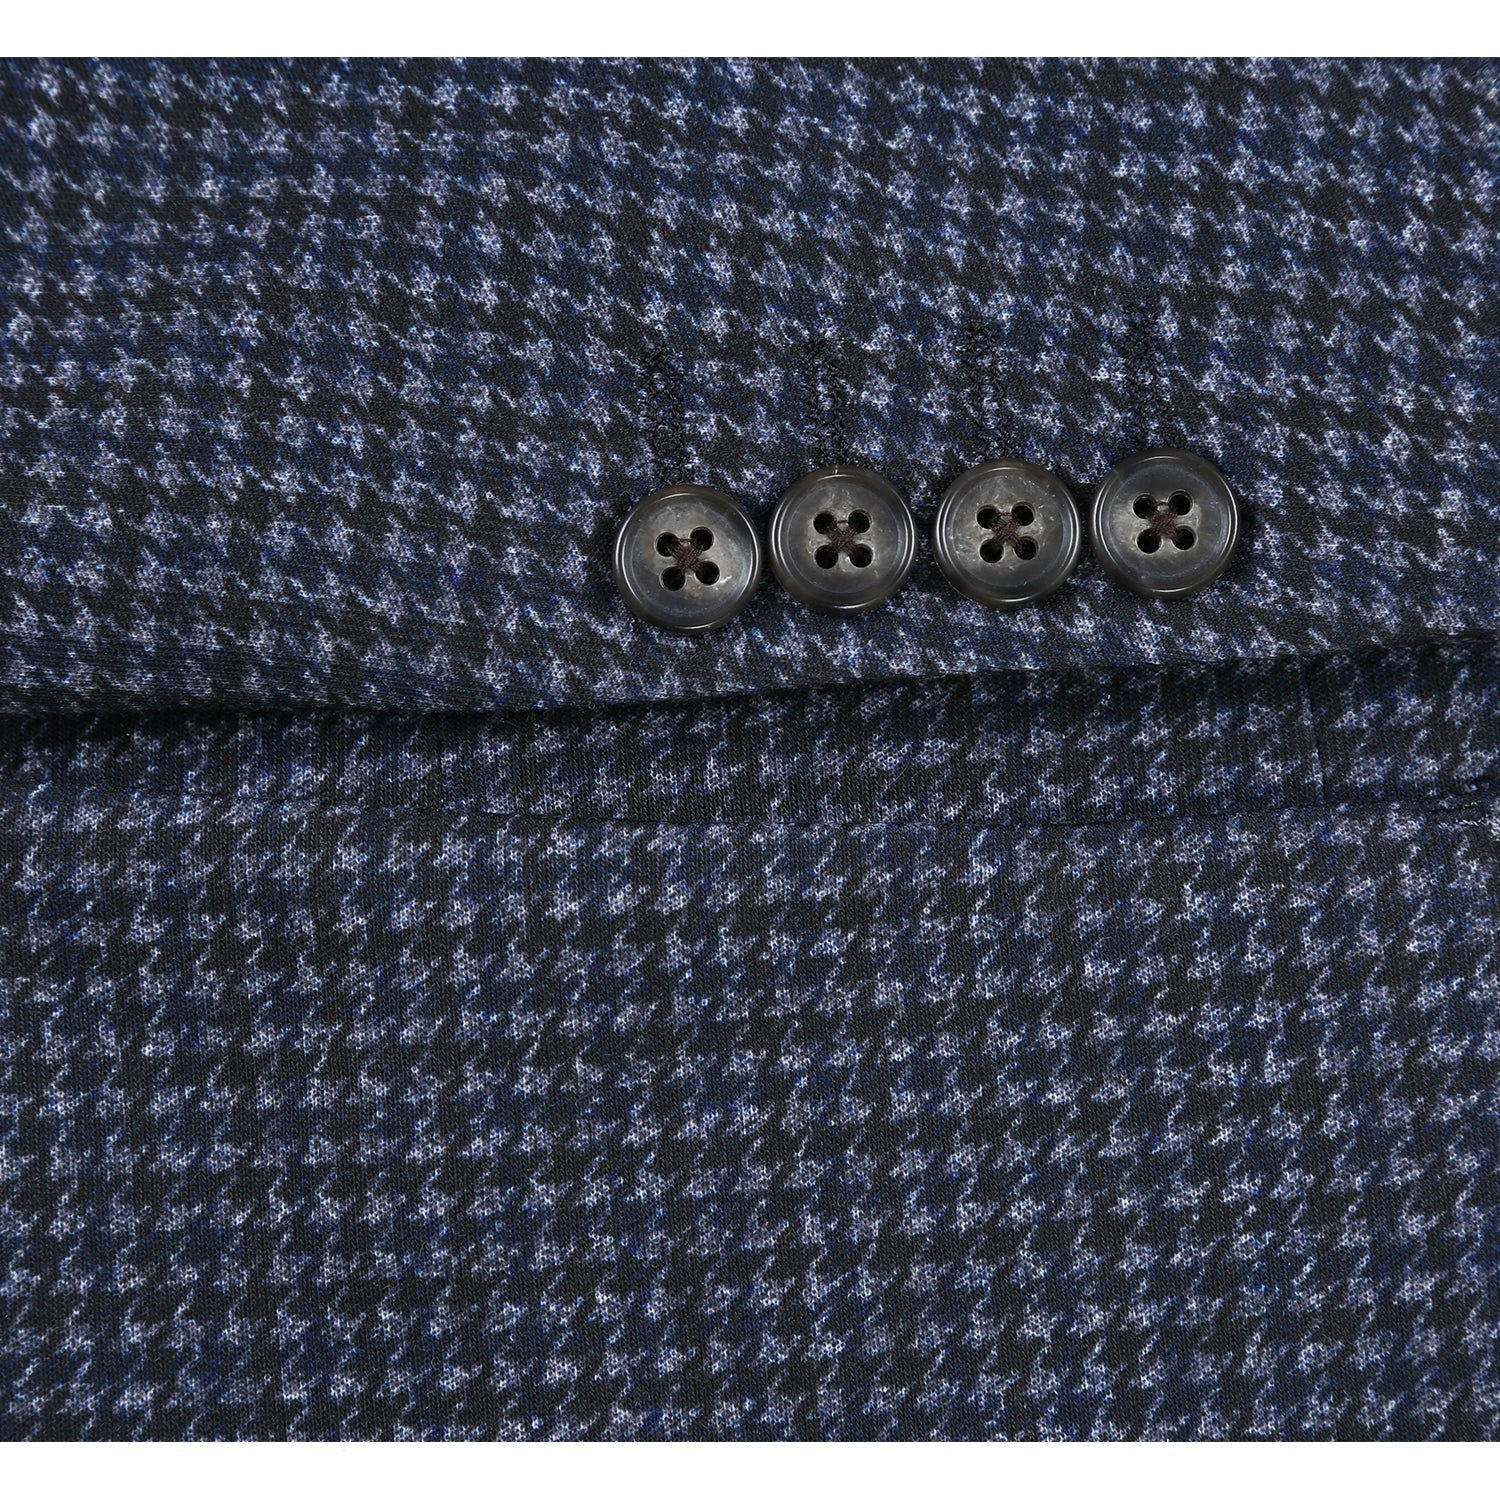 Single Breasted SLIM FIT Half Canvas Soft Jacket in Navy and Grey Houndstooth (Regular and Long Available) by Pelago